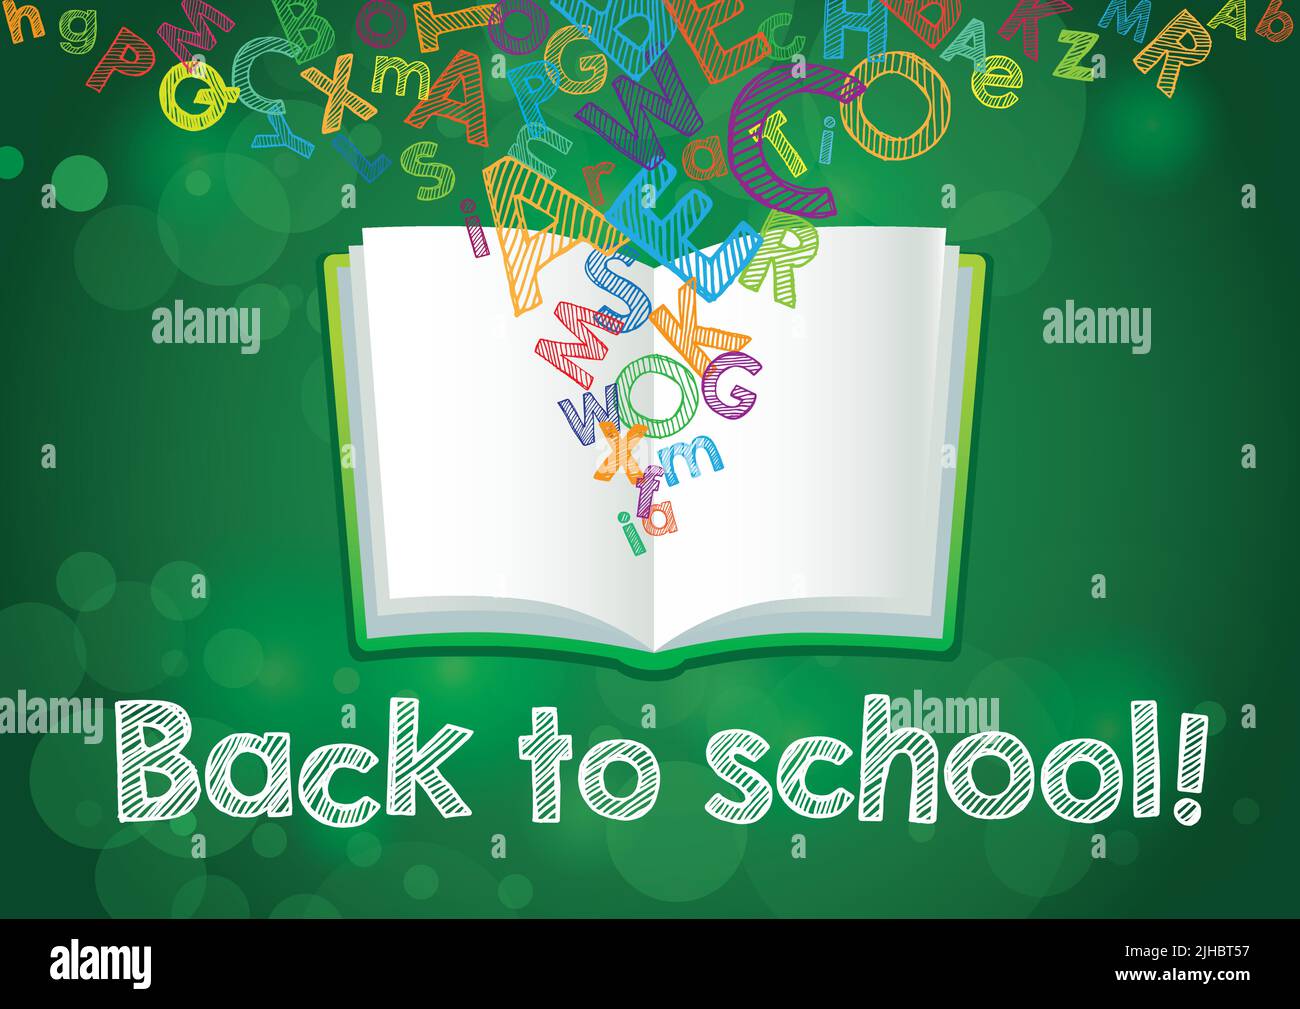 Back to School book banner. Open book with flying ABC letters, creative background. 3D style. Sample place for invitating or congratulating text. Isol Stock Vector